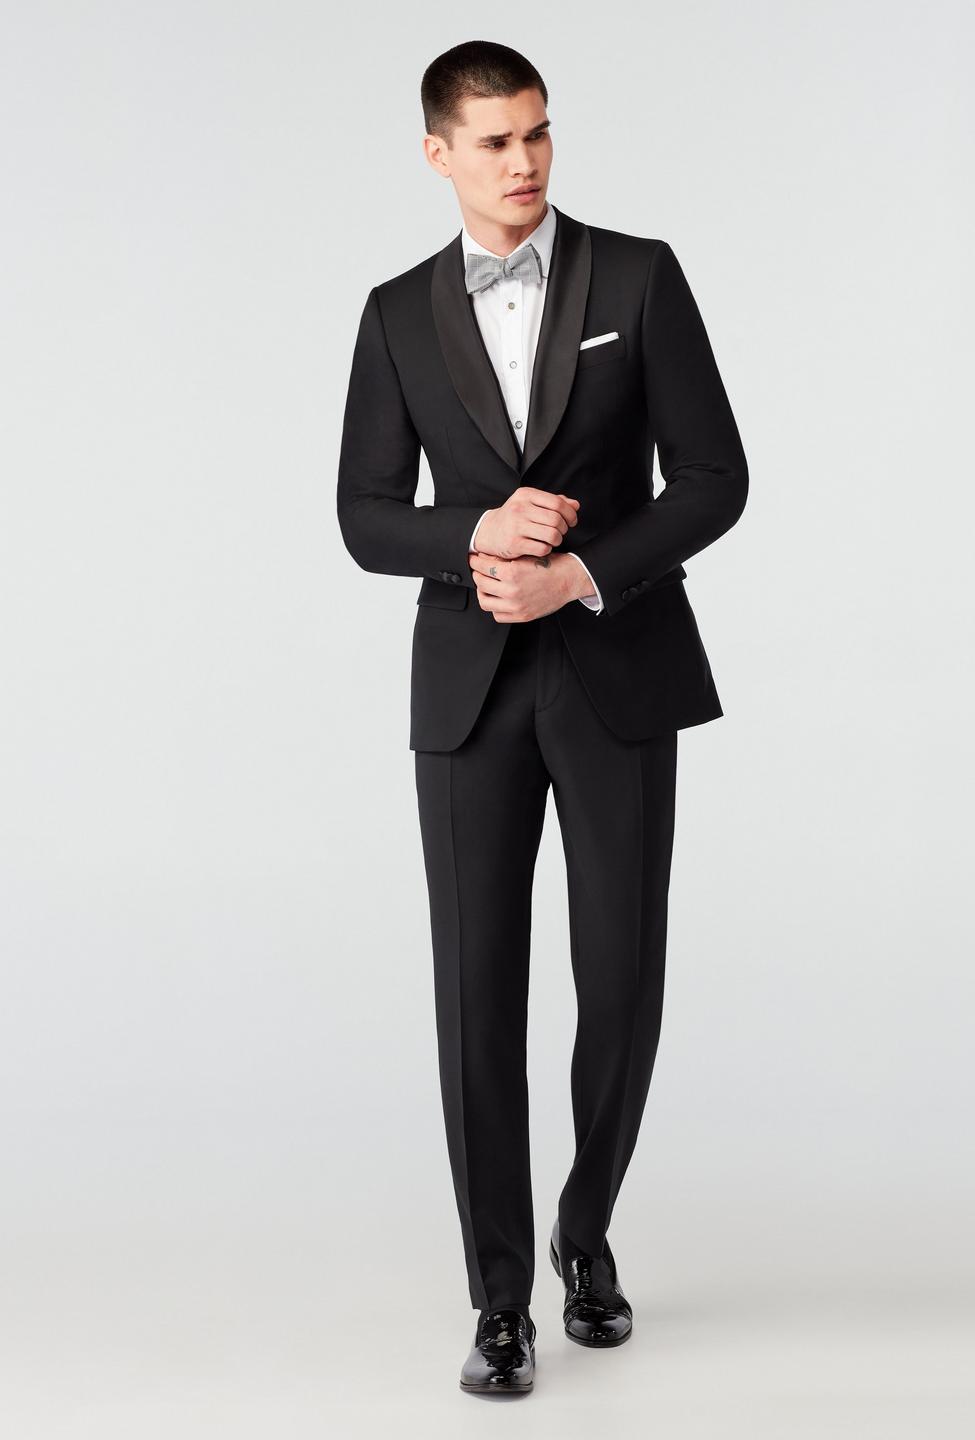 Black suit - Highworth Solid Design from Tuxedo Indochino Collection